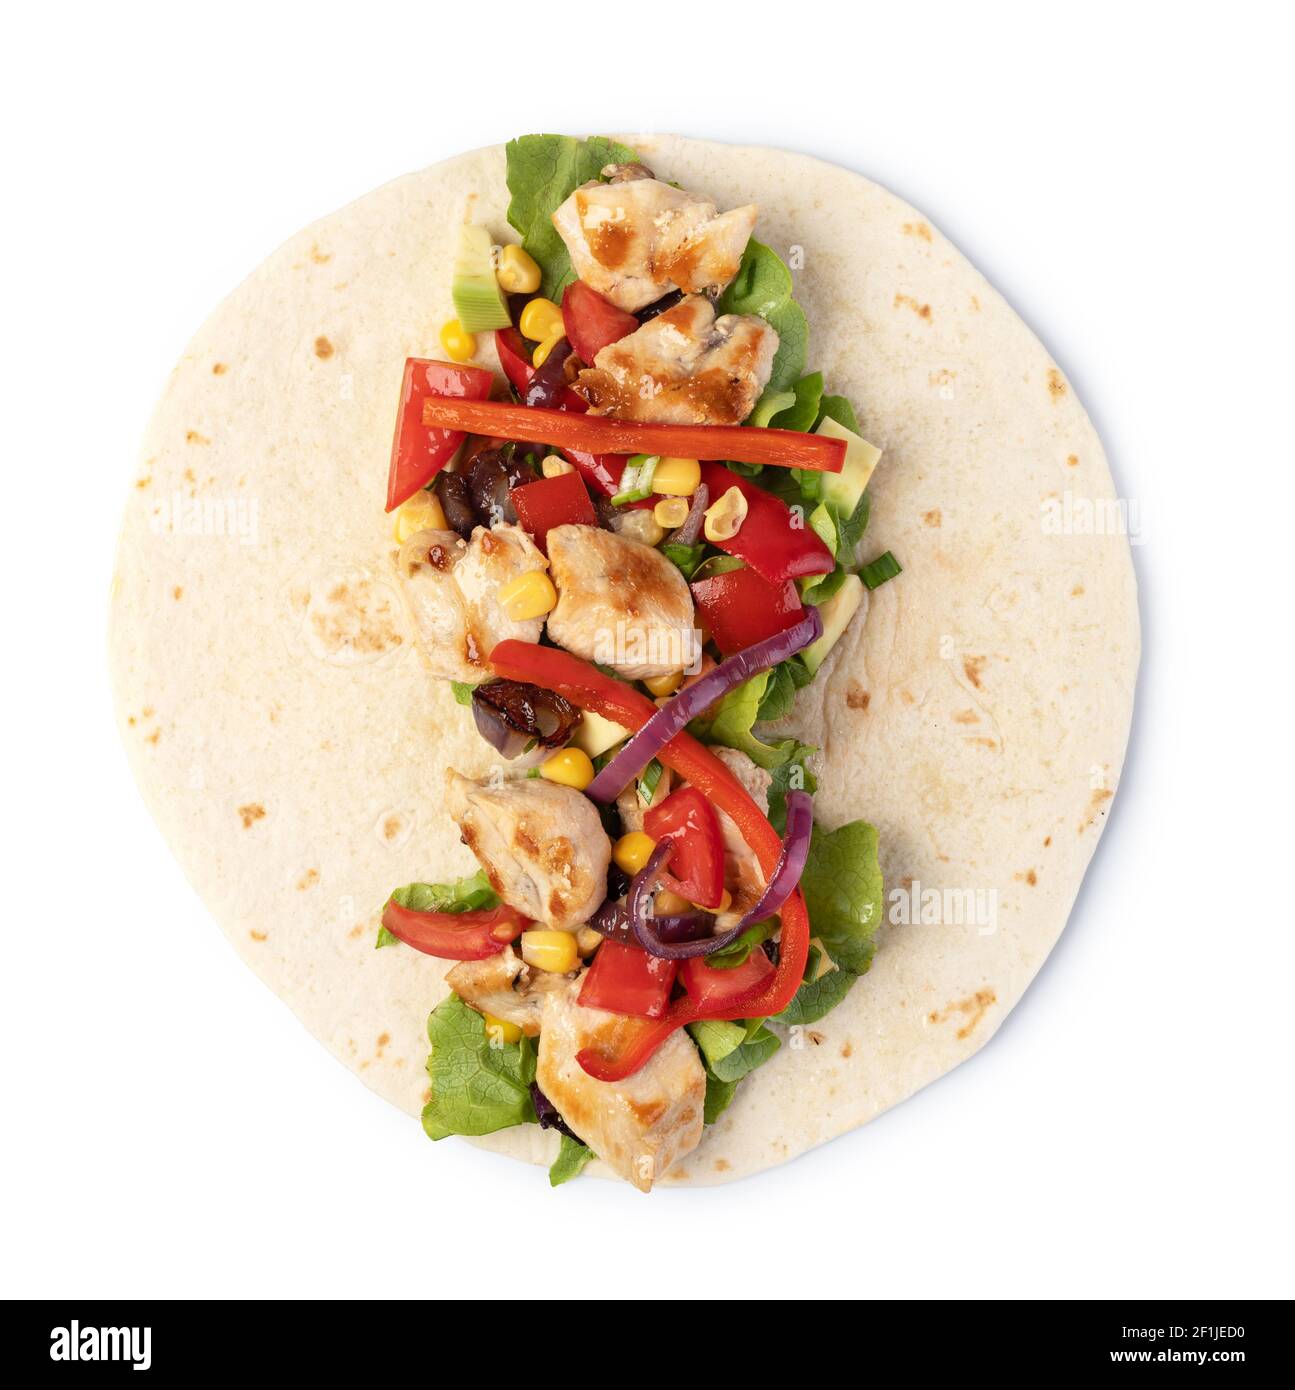 Burrito with vegetables and tortilla, Stock Photo